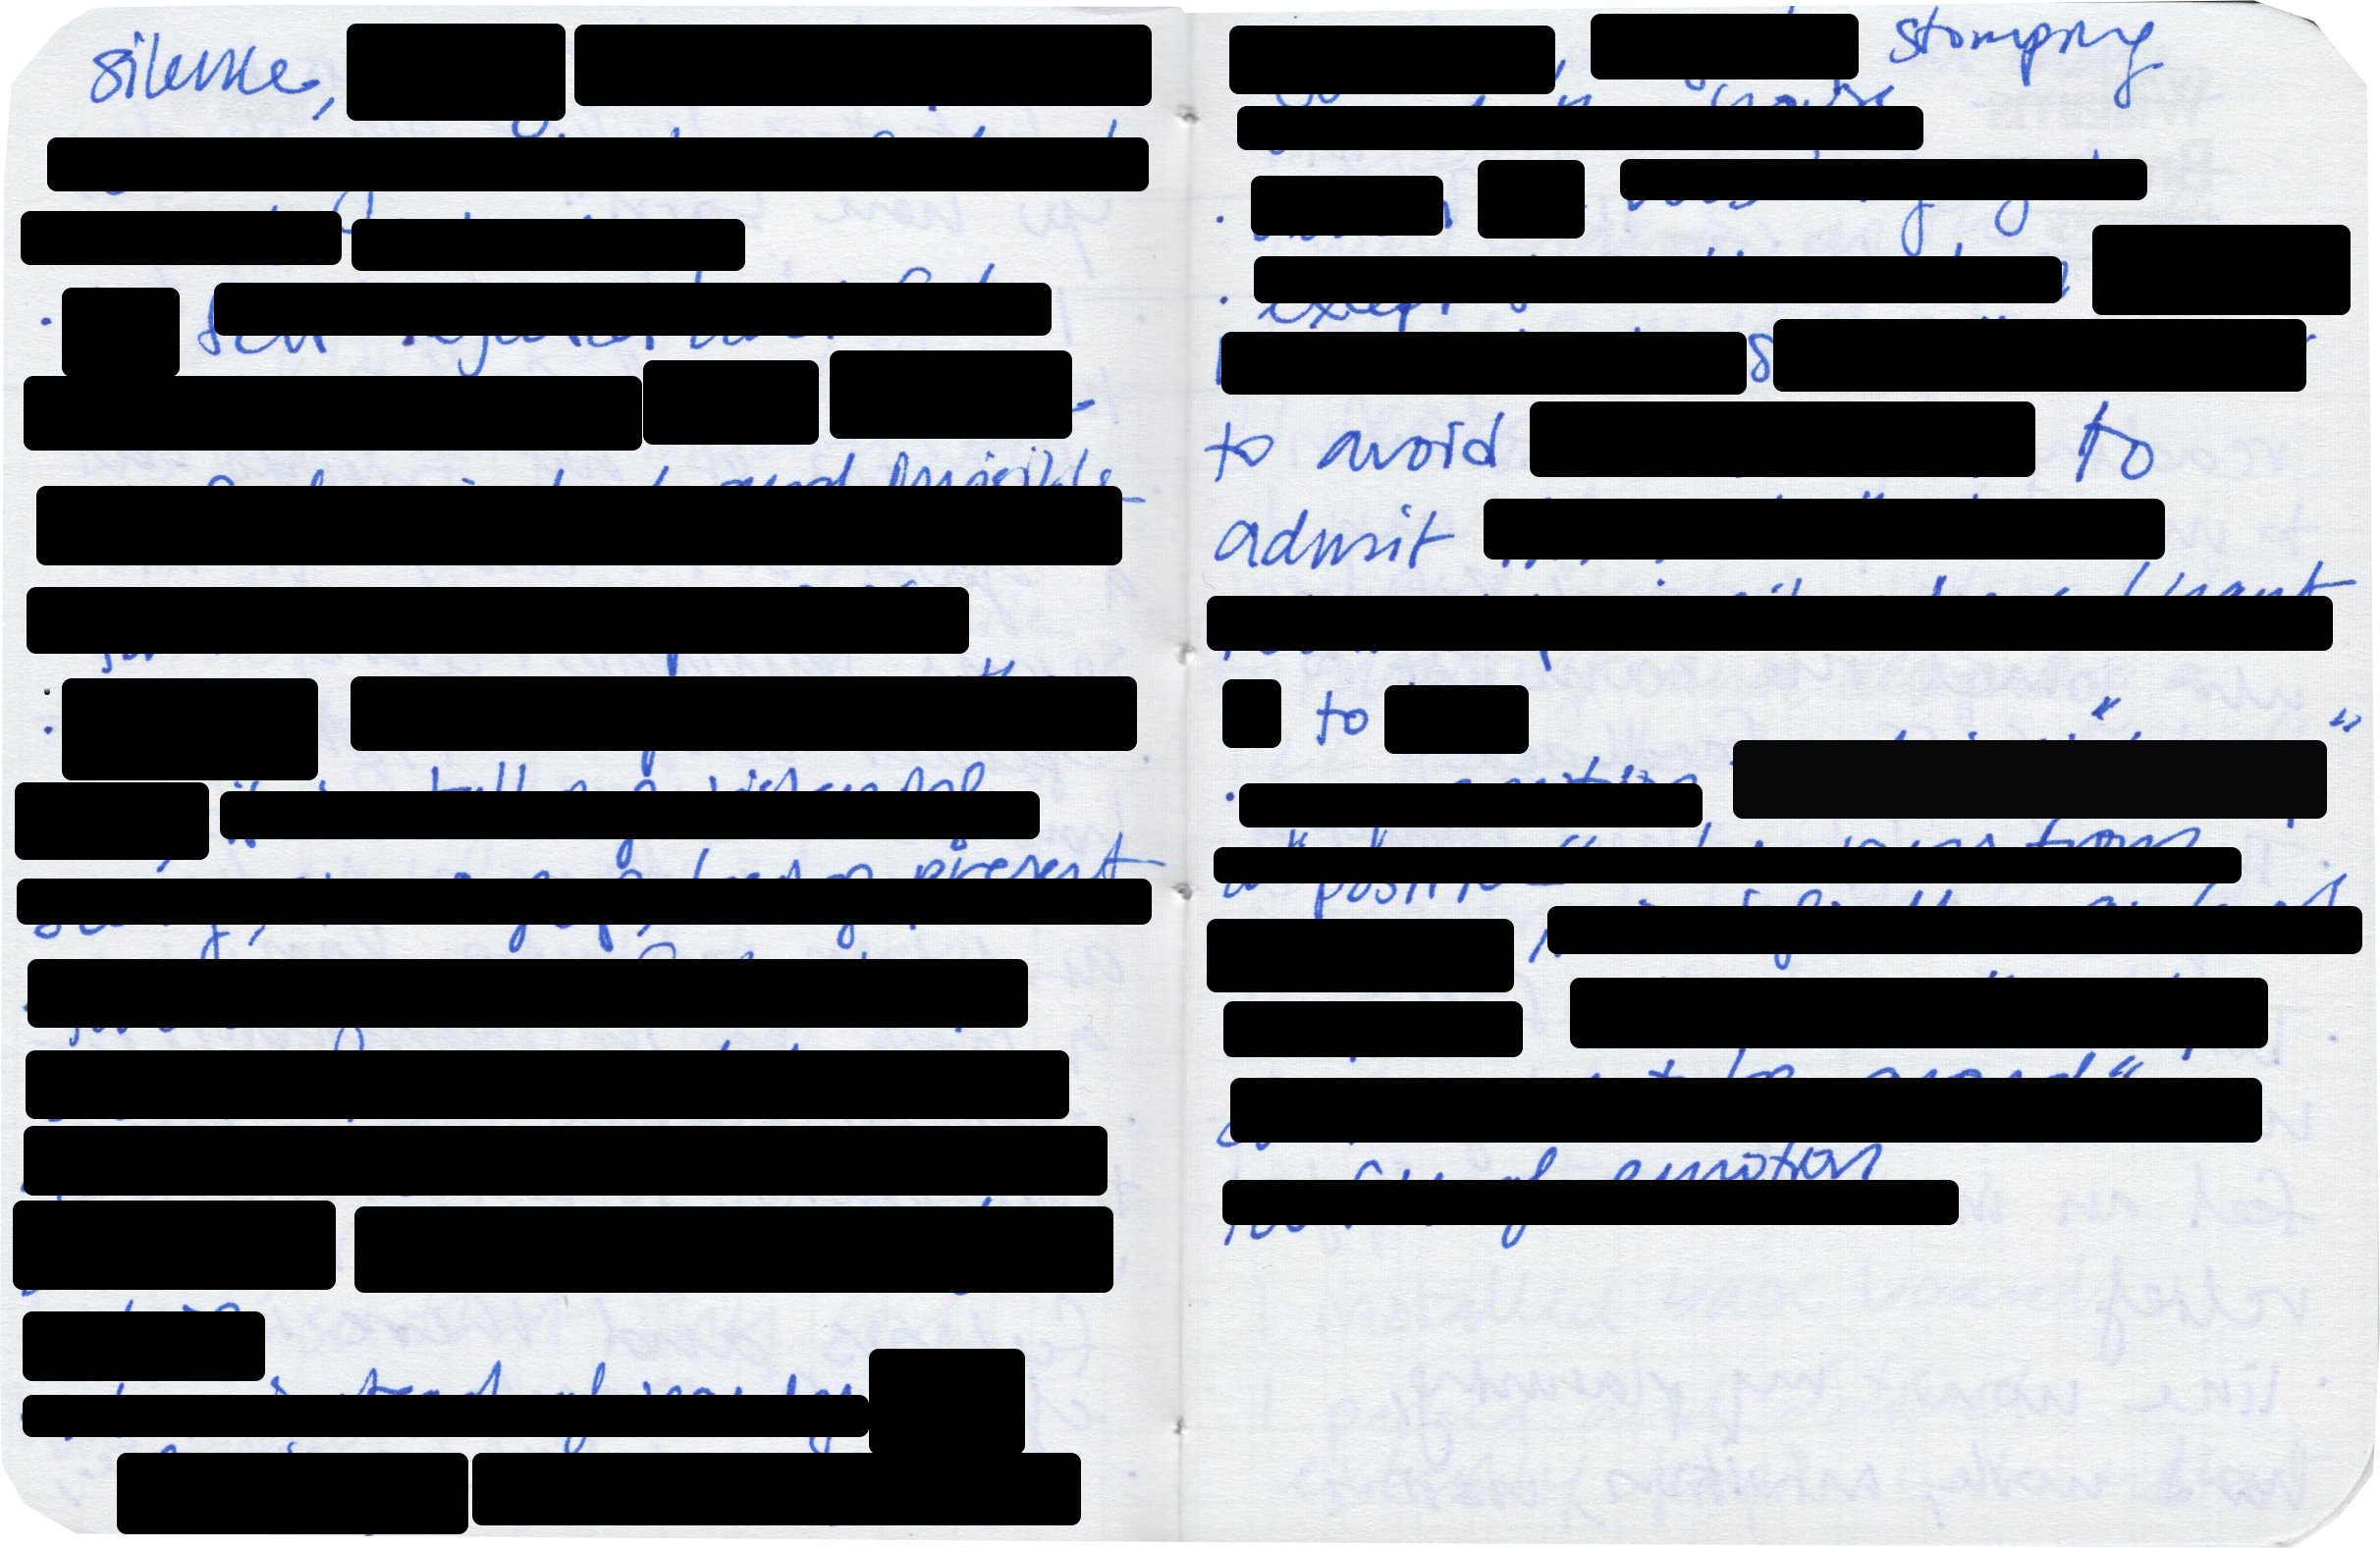 redacted notes - continued edited copy.jpg